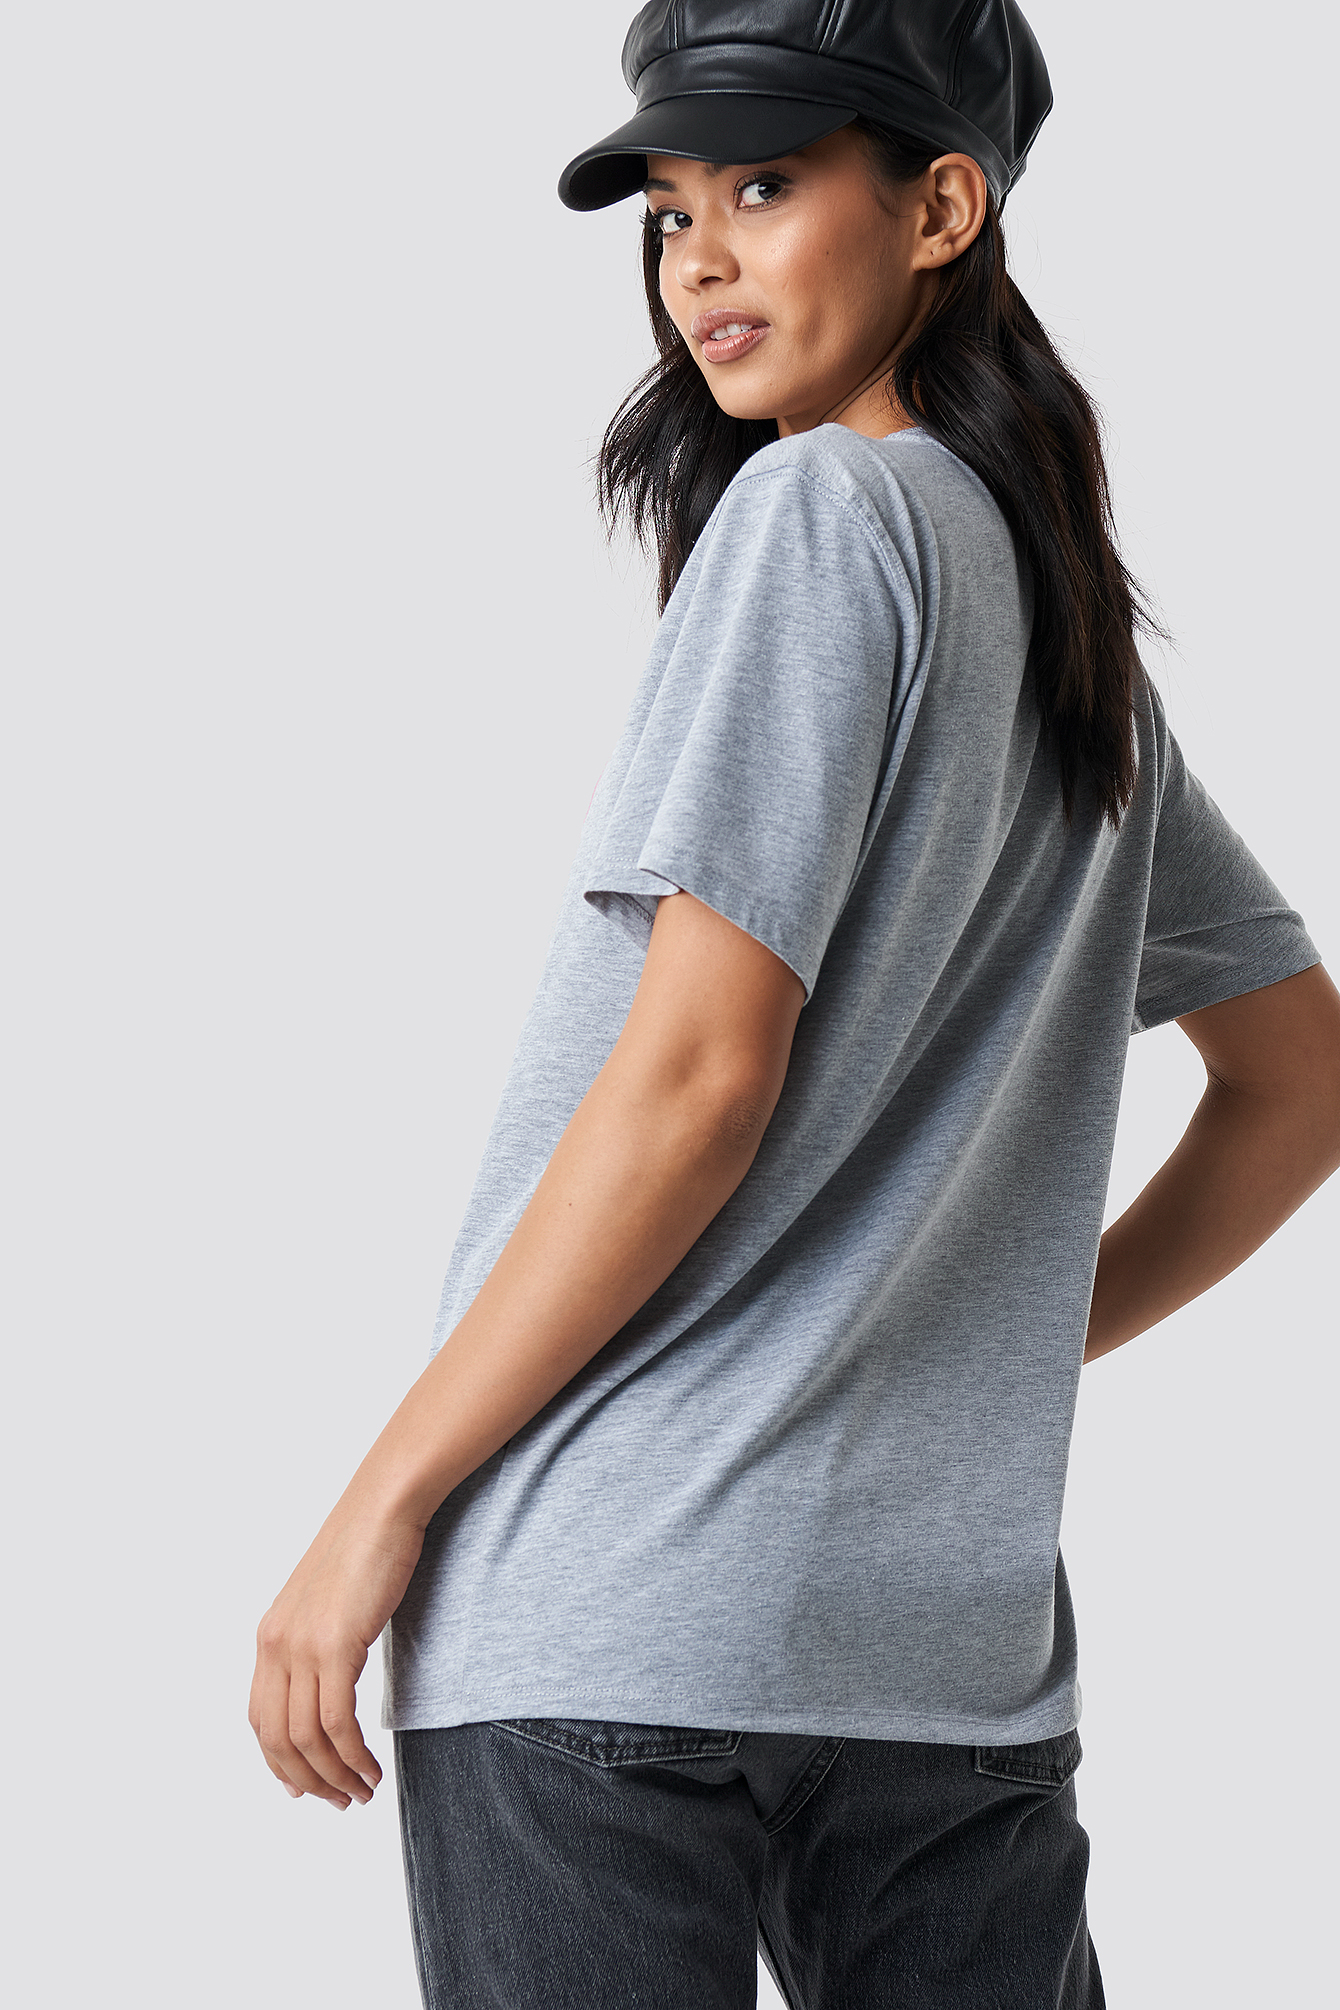 Grey Trouble Makers Basic Tee